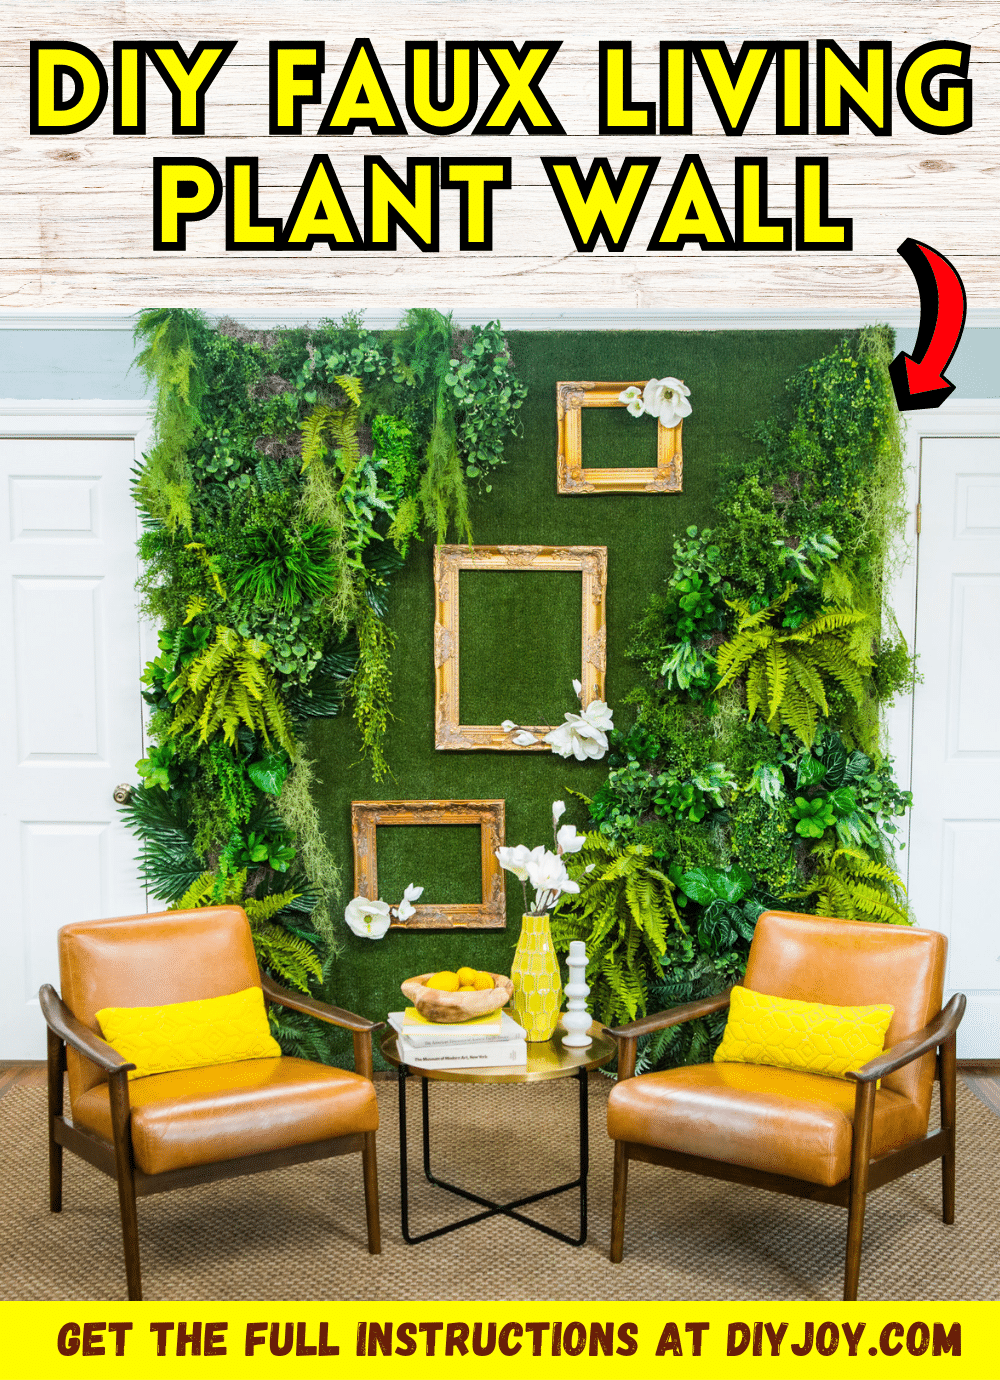 How To Make A DIY Faux Living Plant Wall